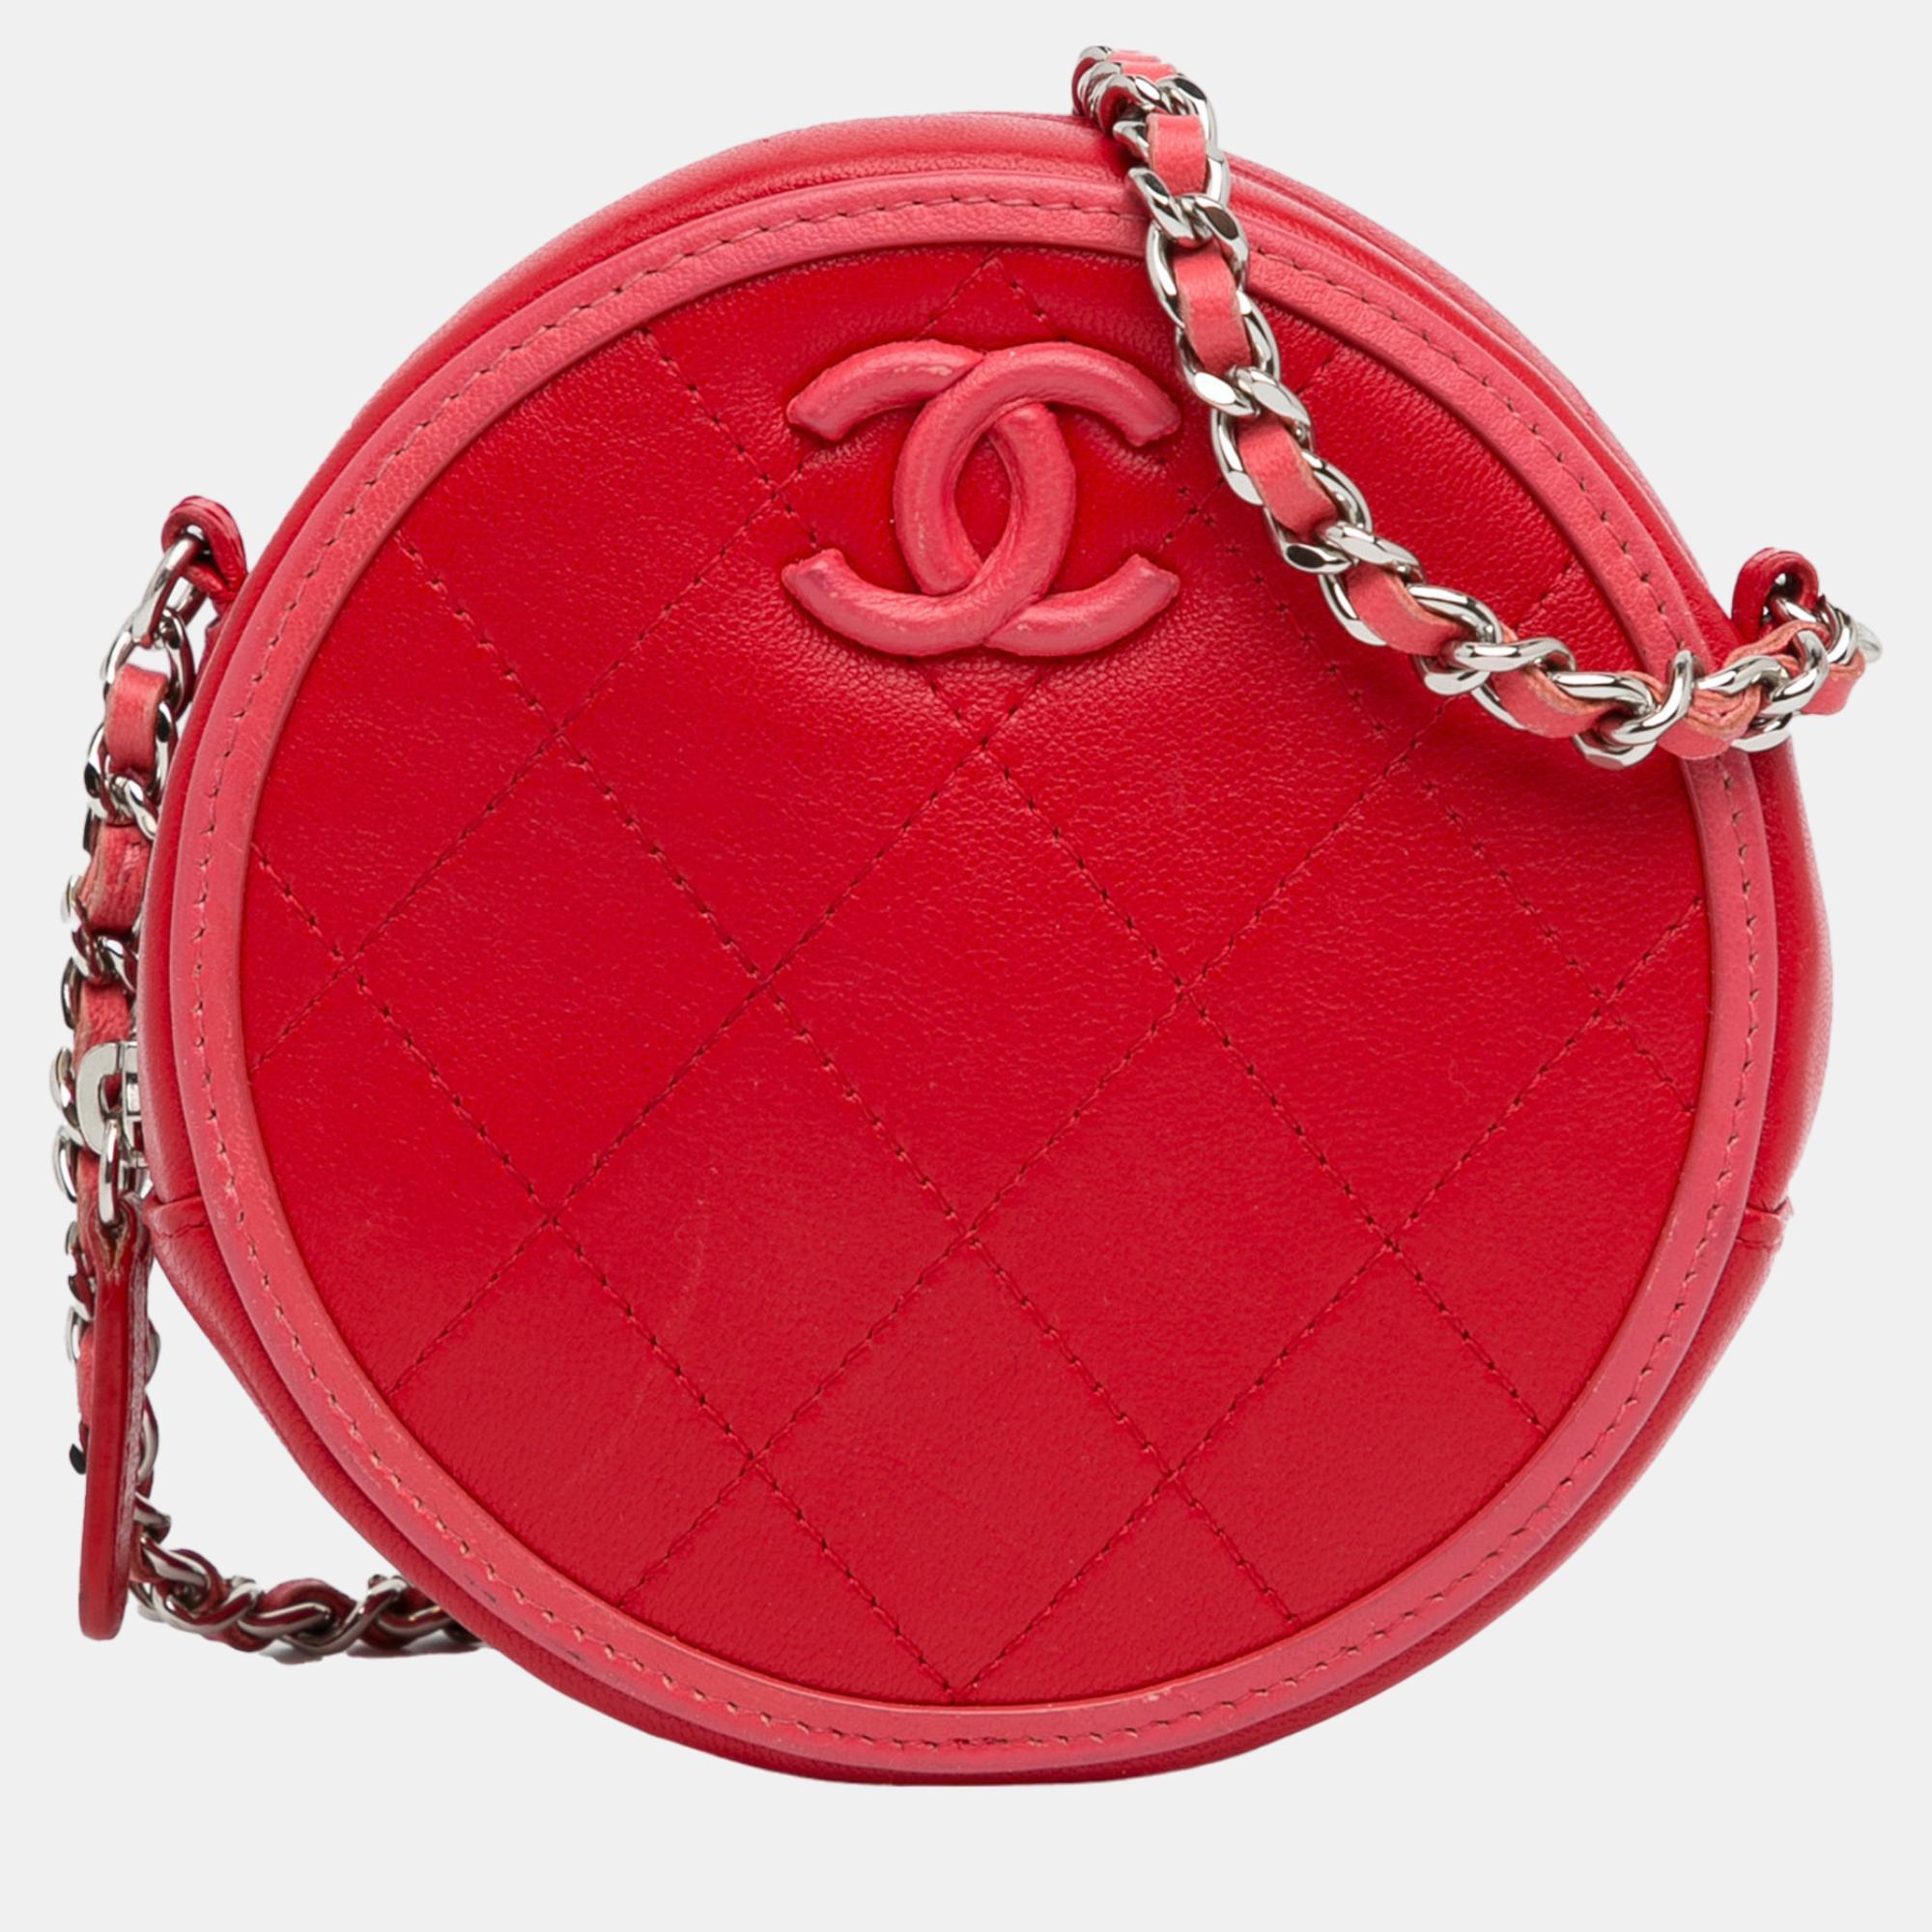 Chanel red lambskin color pop cc round crossbody